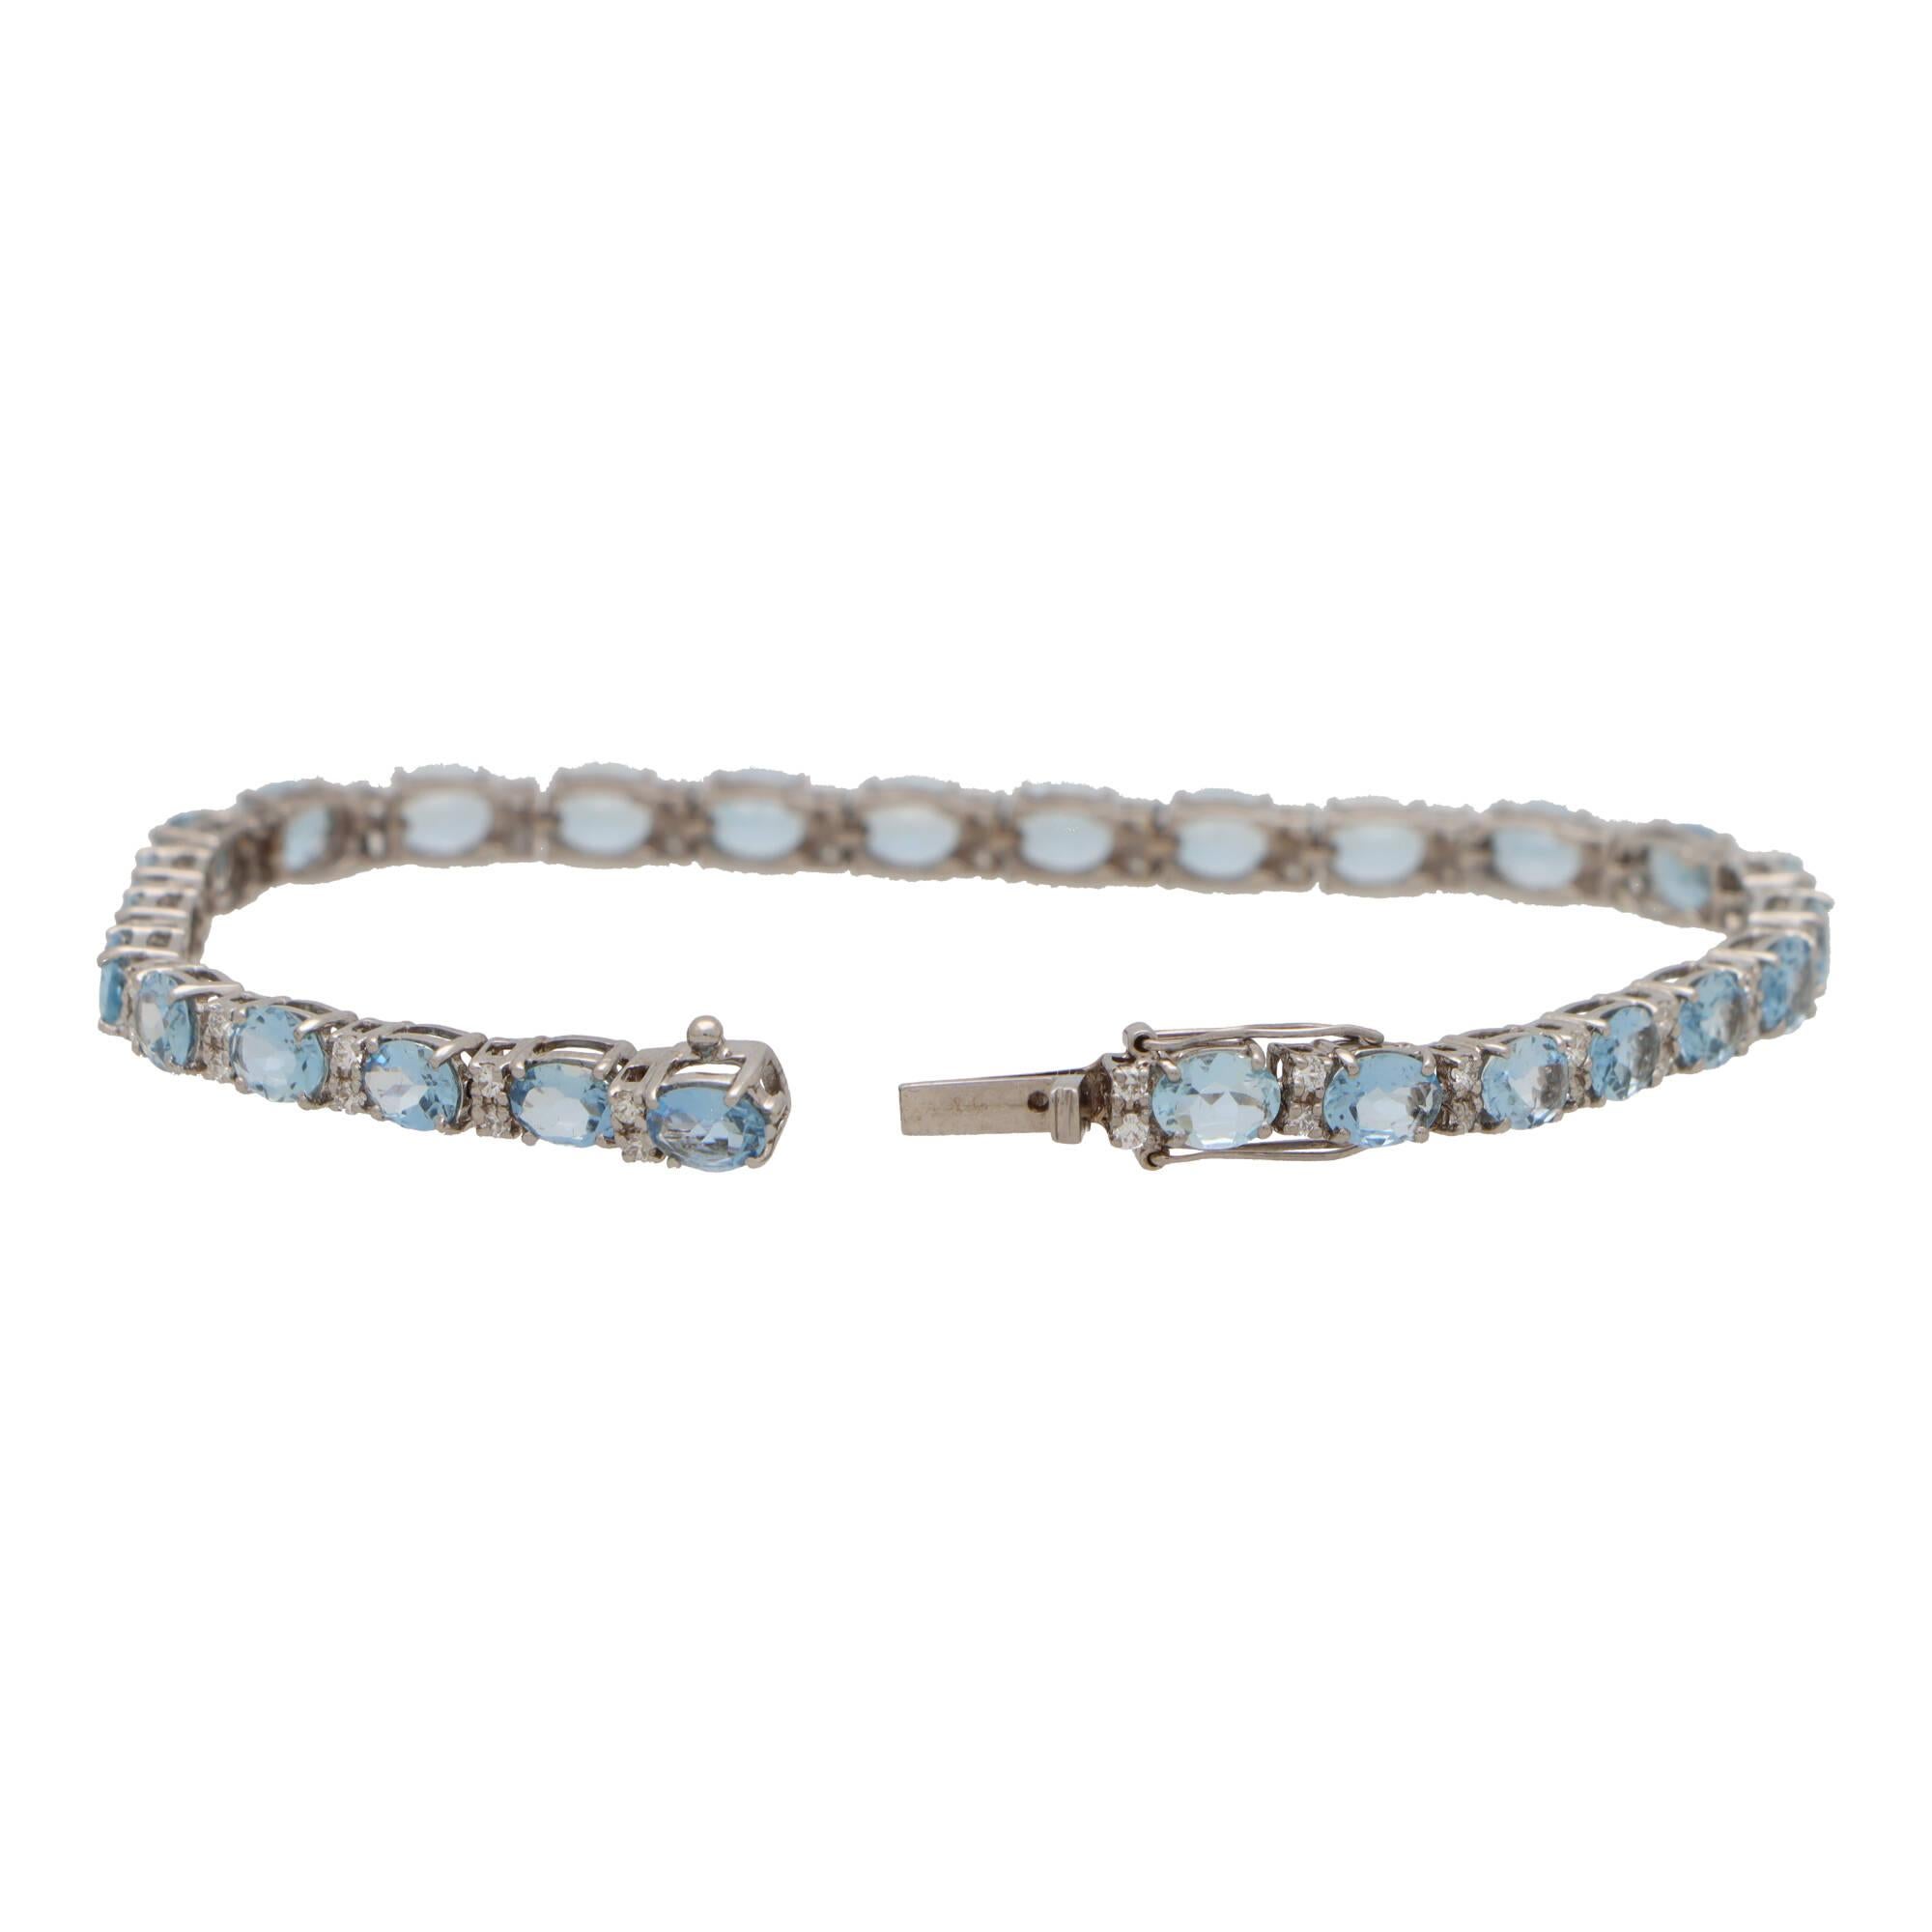 A beautiful contemporary diamond and aquamarine bracelet set in 18k white gold.

The bracelet is composed of a grand total of 27 oval cut aquamarines and 54 round brilliant cut diamonds. All of the stones are securely claw set and alternate between